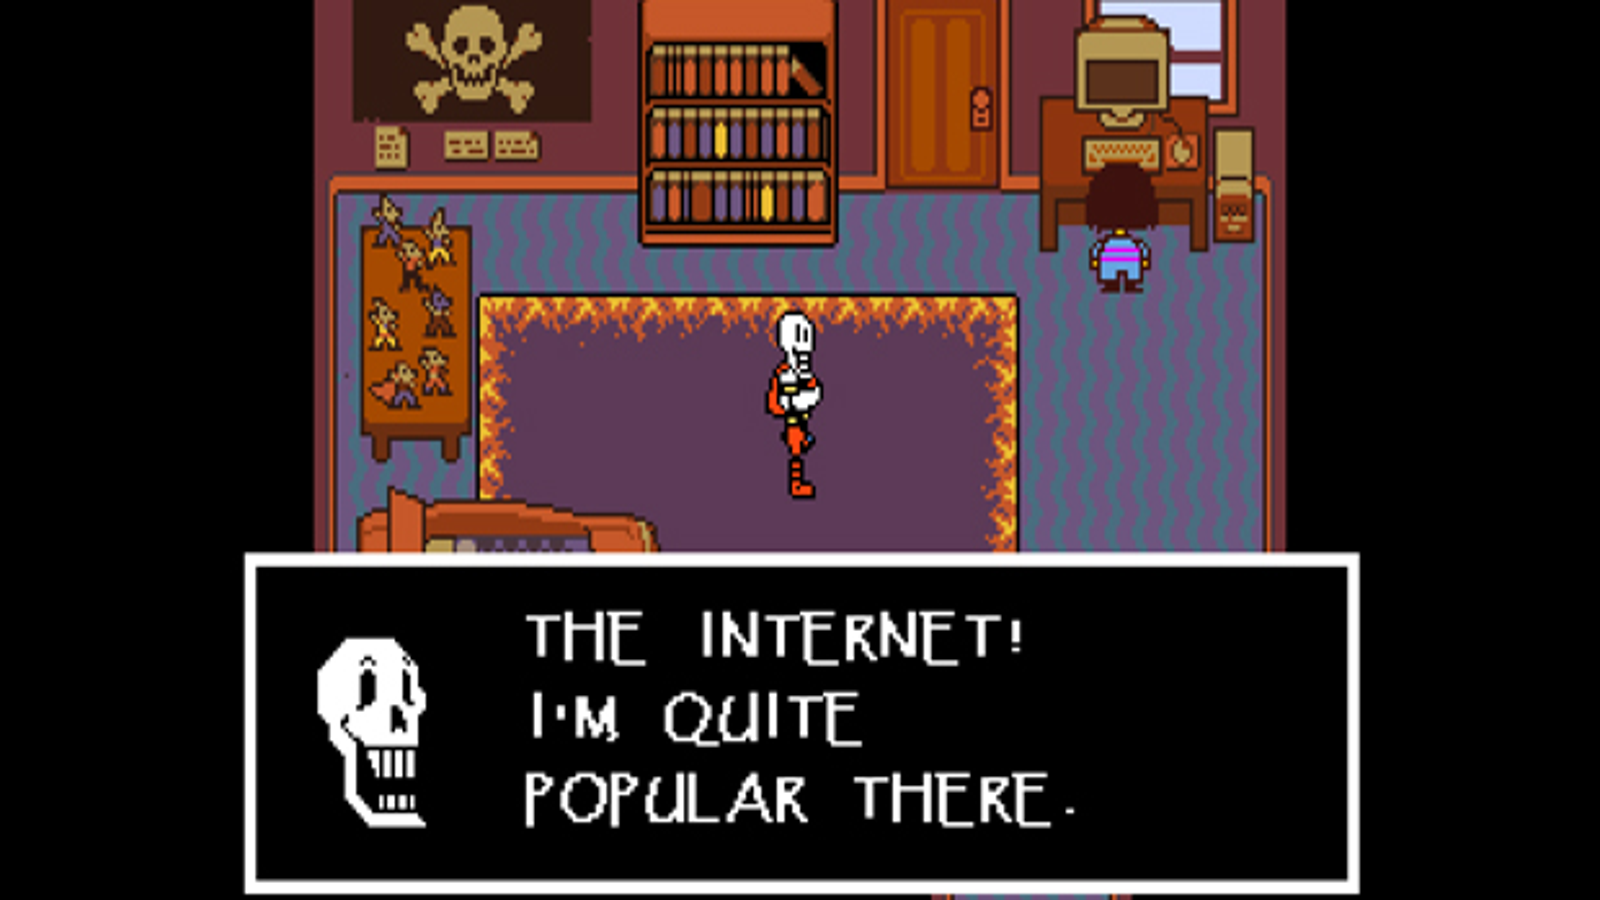 Why Undertale Is Still A Masterpiece 